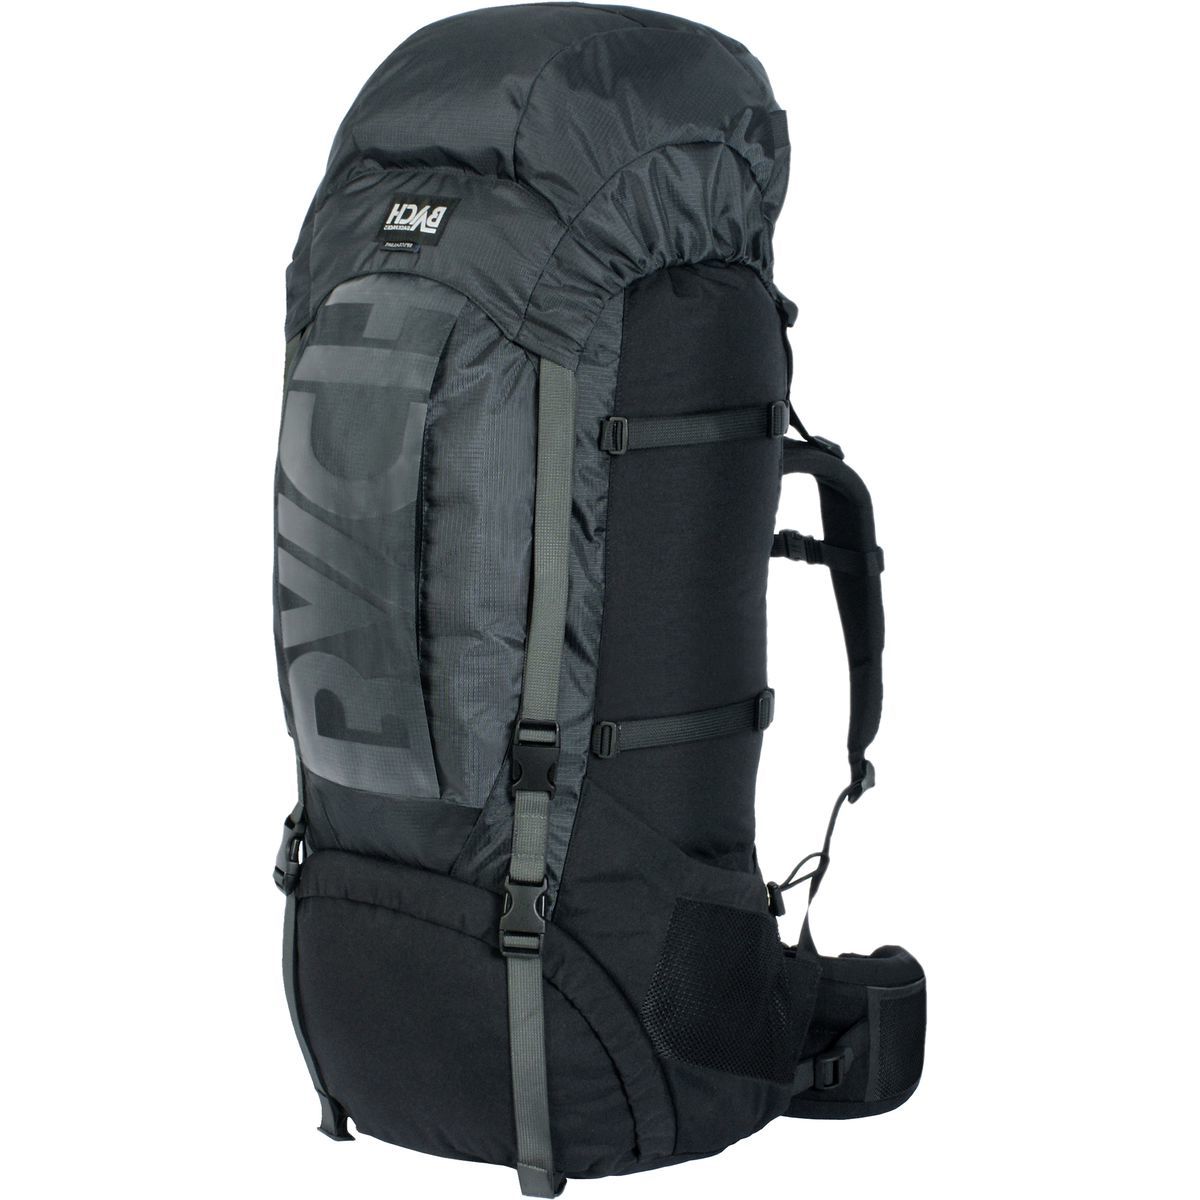 Bach Specialist 4 83L Backpack - Men's